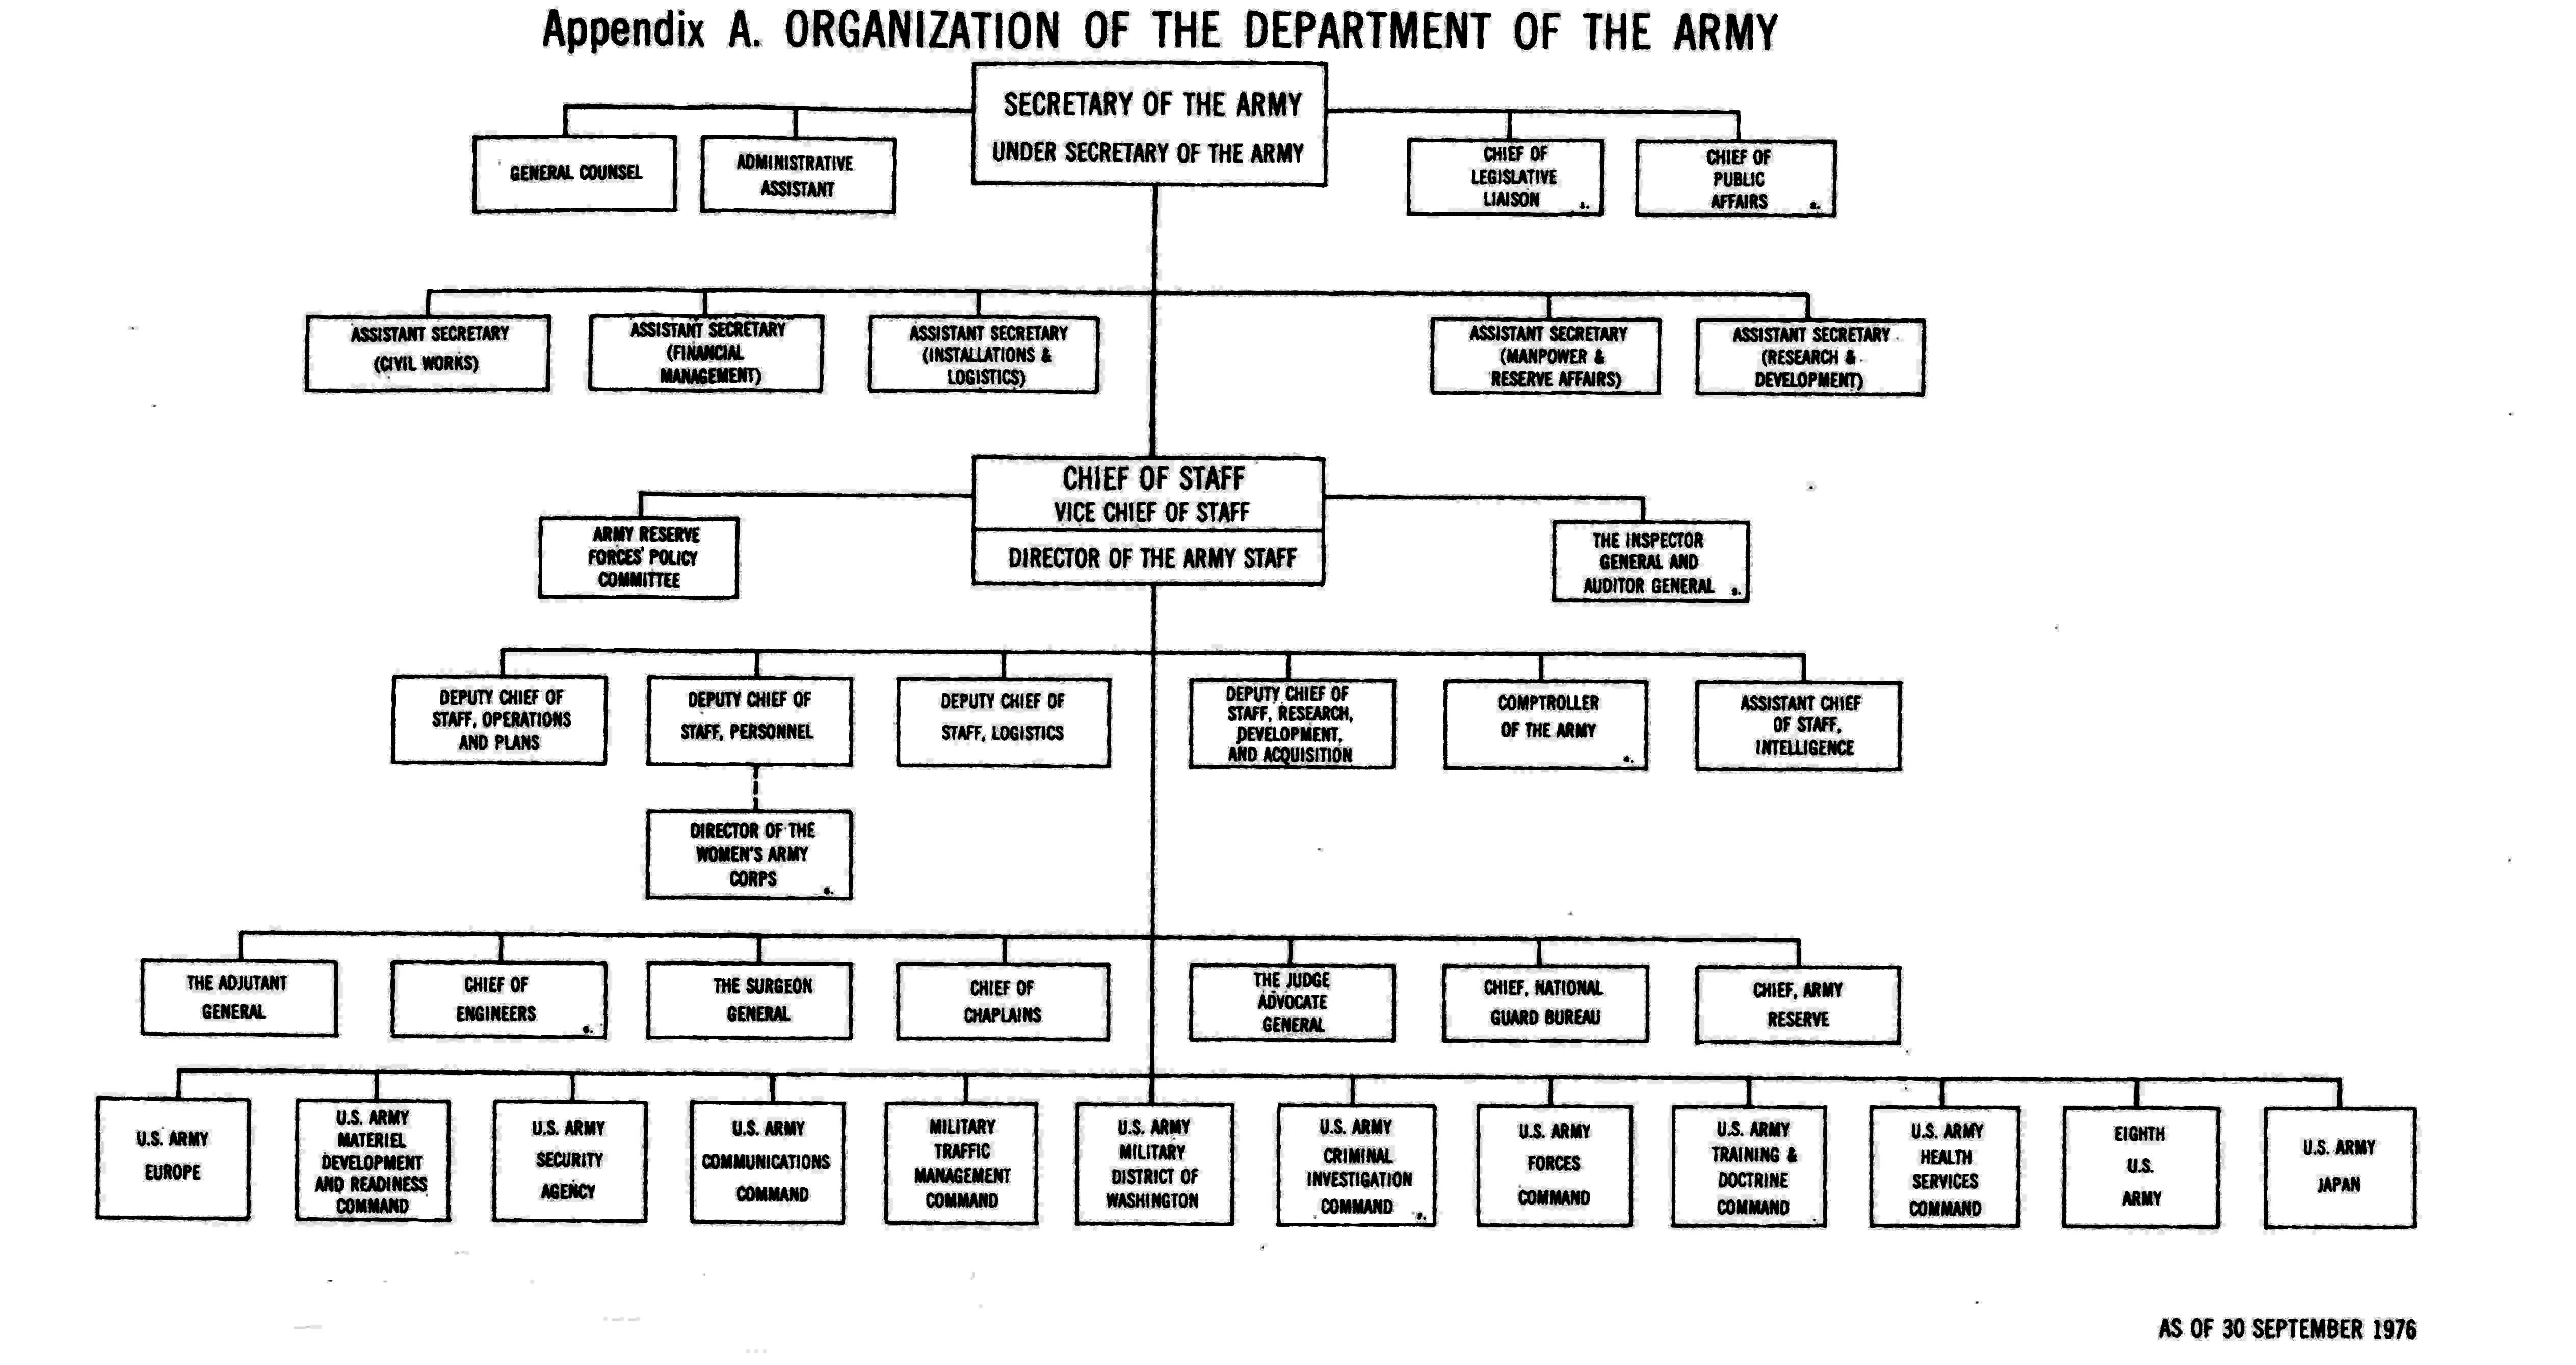 Chart, Appendix. Organization of the Department of Army